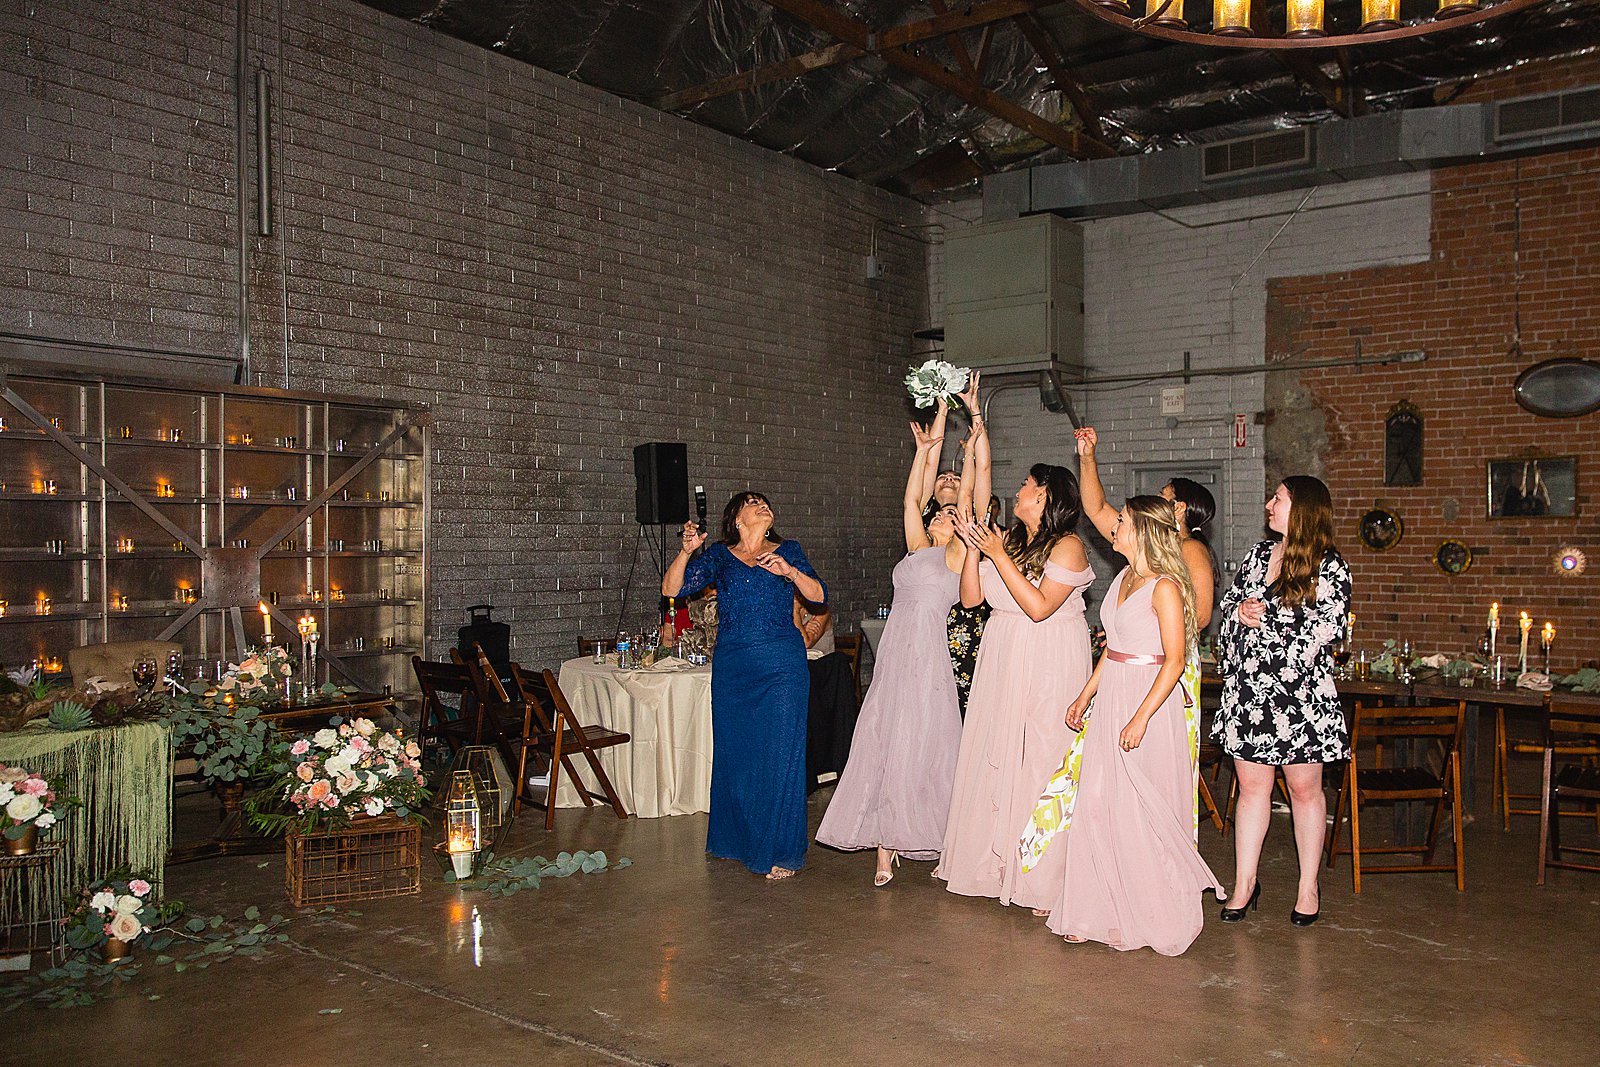 Bouquet toss at The Ice House wedding reception by Phoenix wedding photographer PMA Photography.